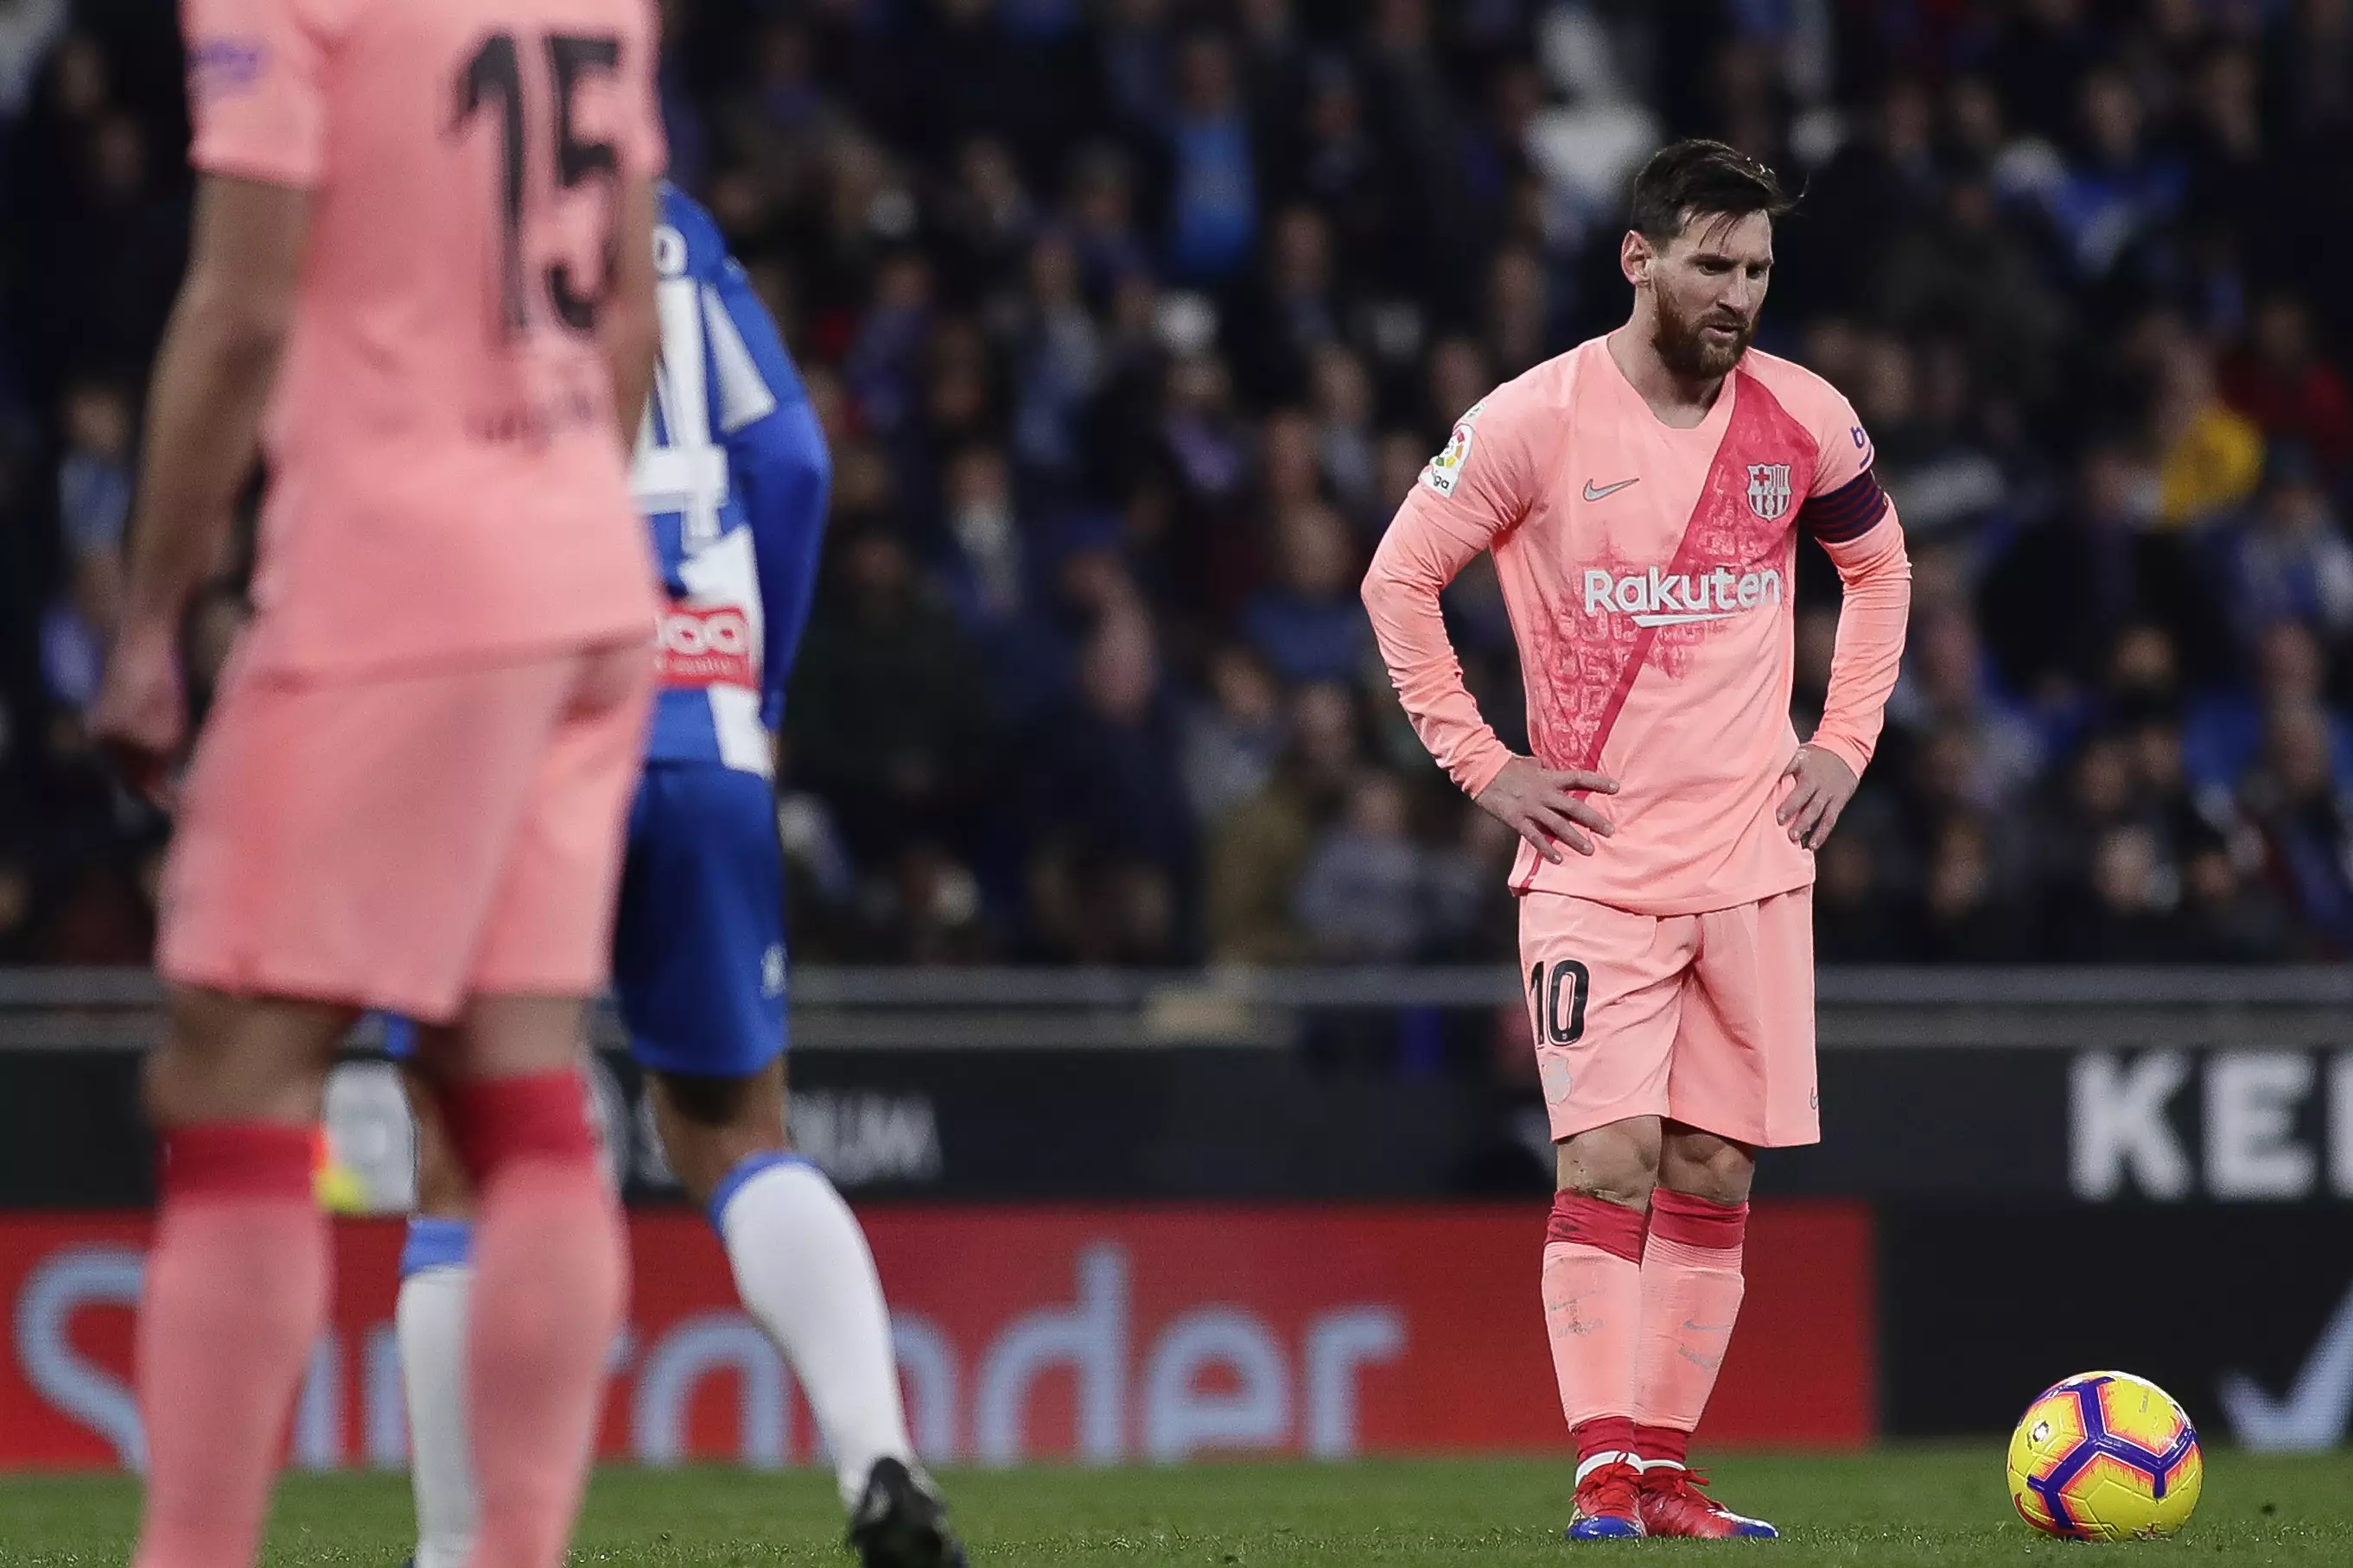 The most frightening sight in La Liga. Image: PA Images